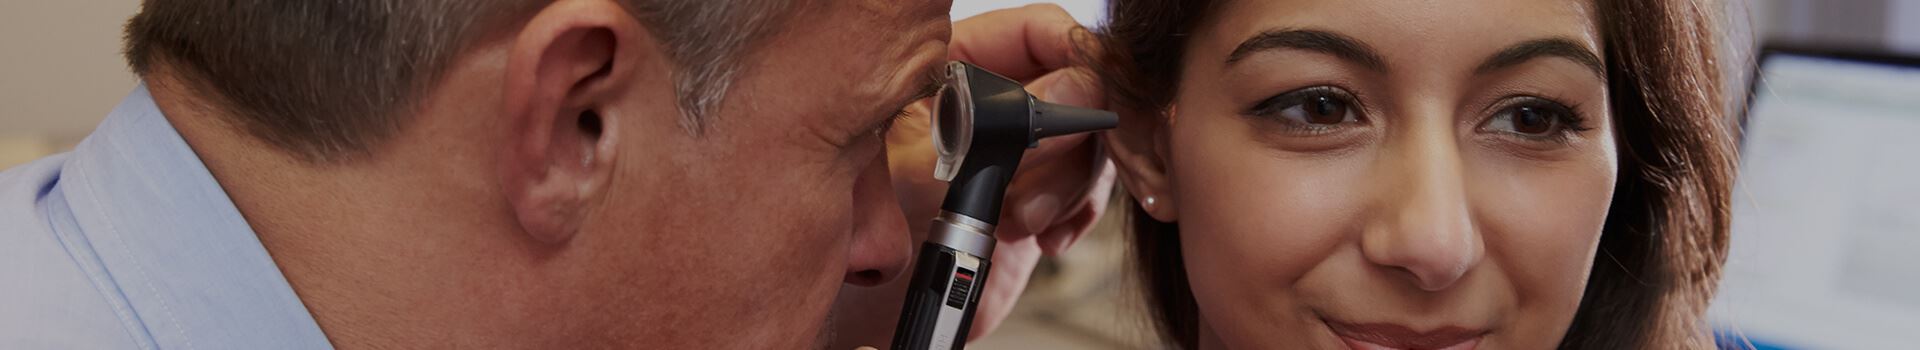 Male physician using an otoscope to look into a female physician's ear